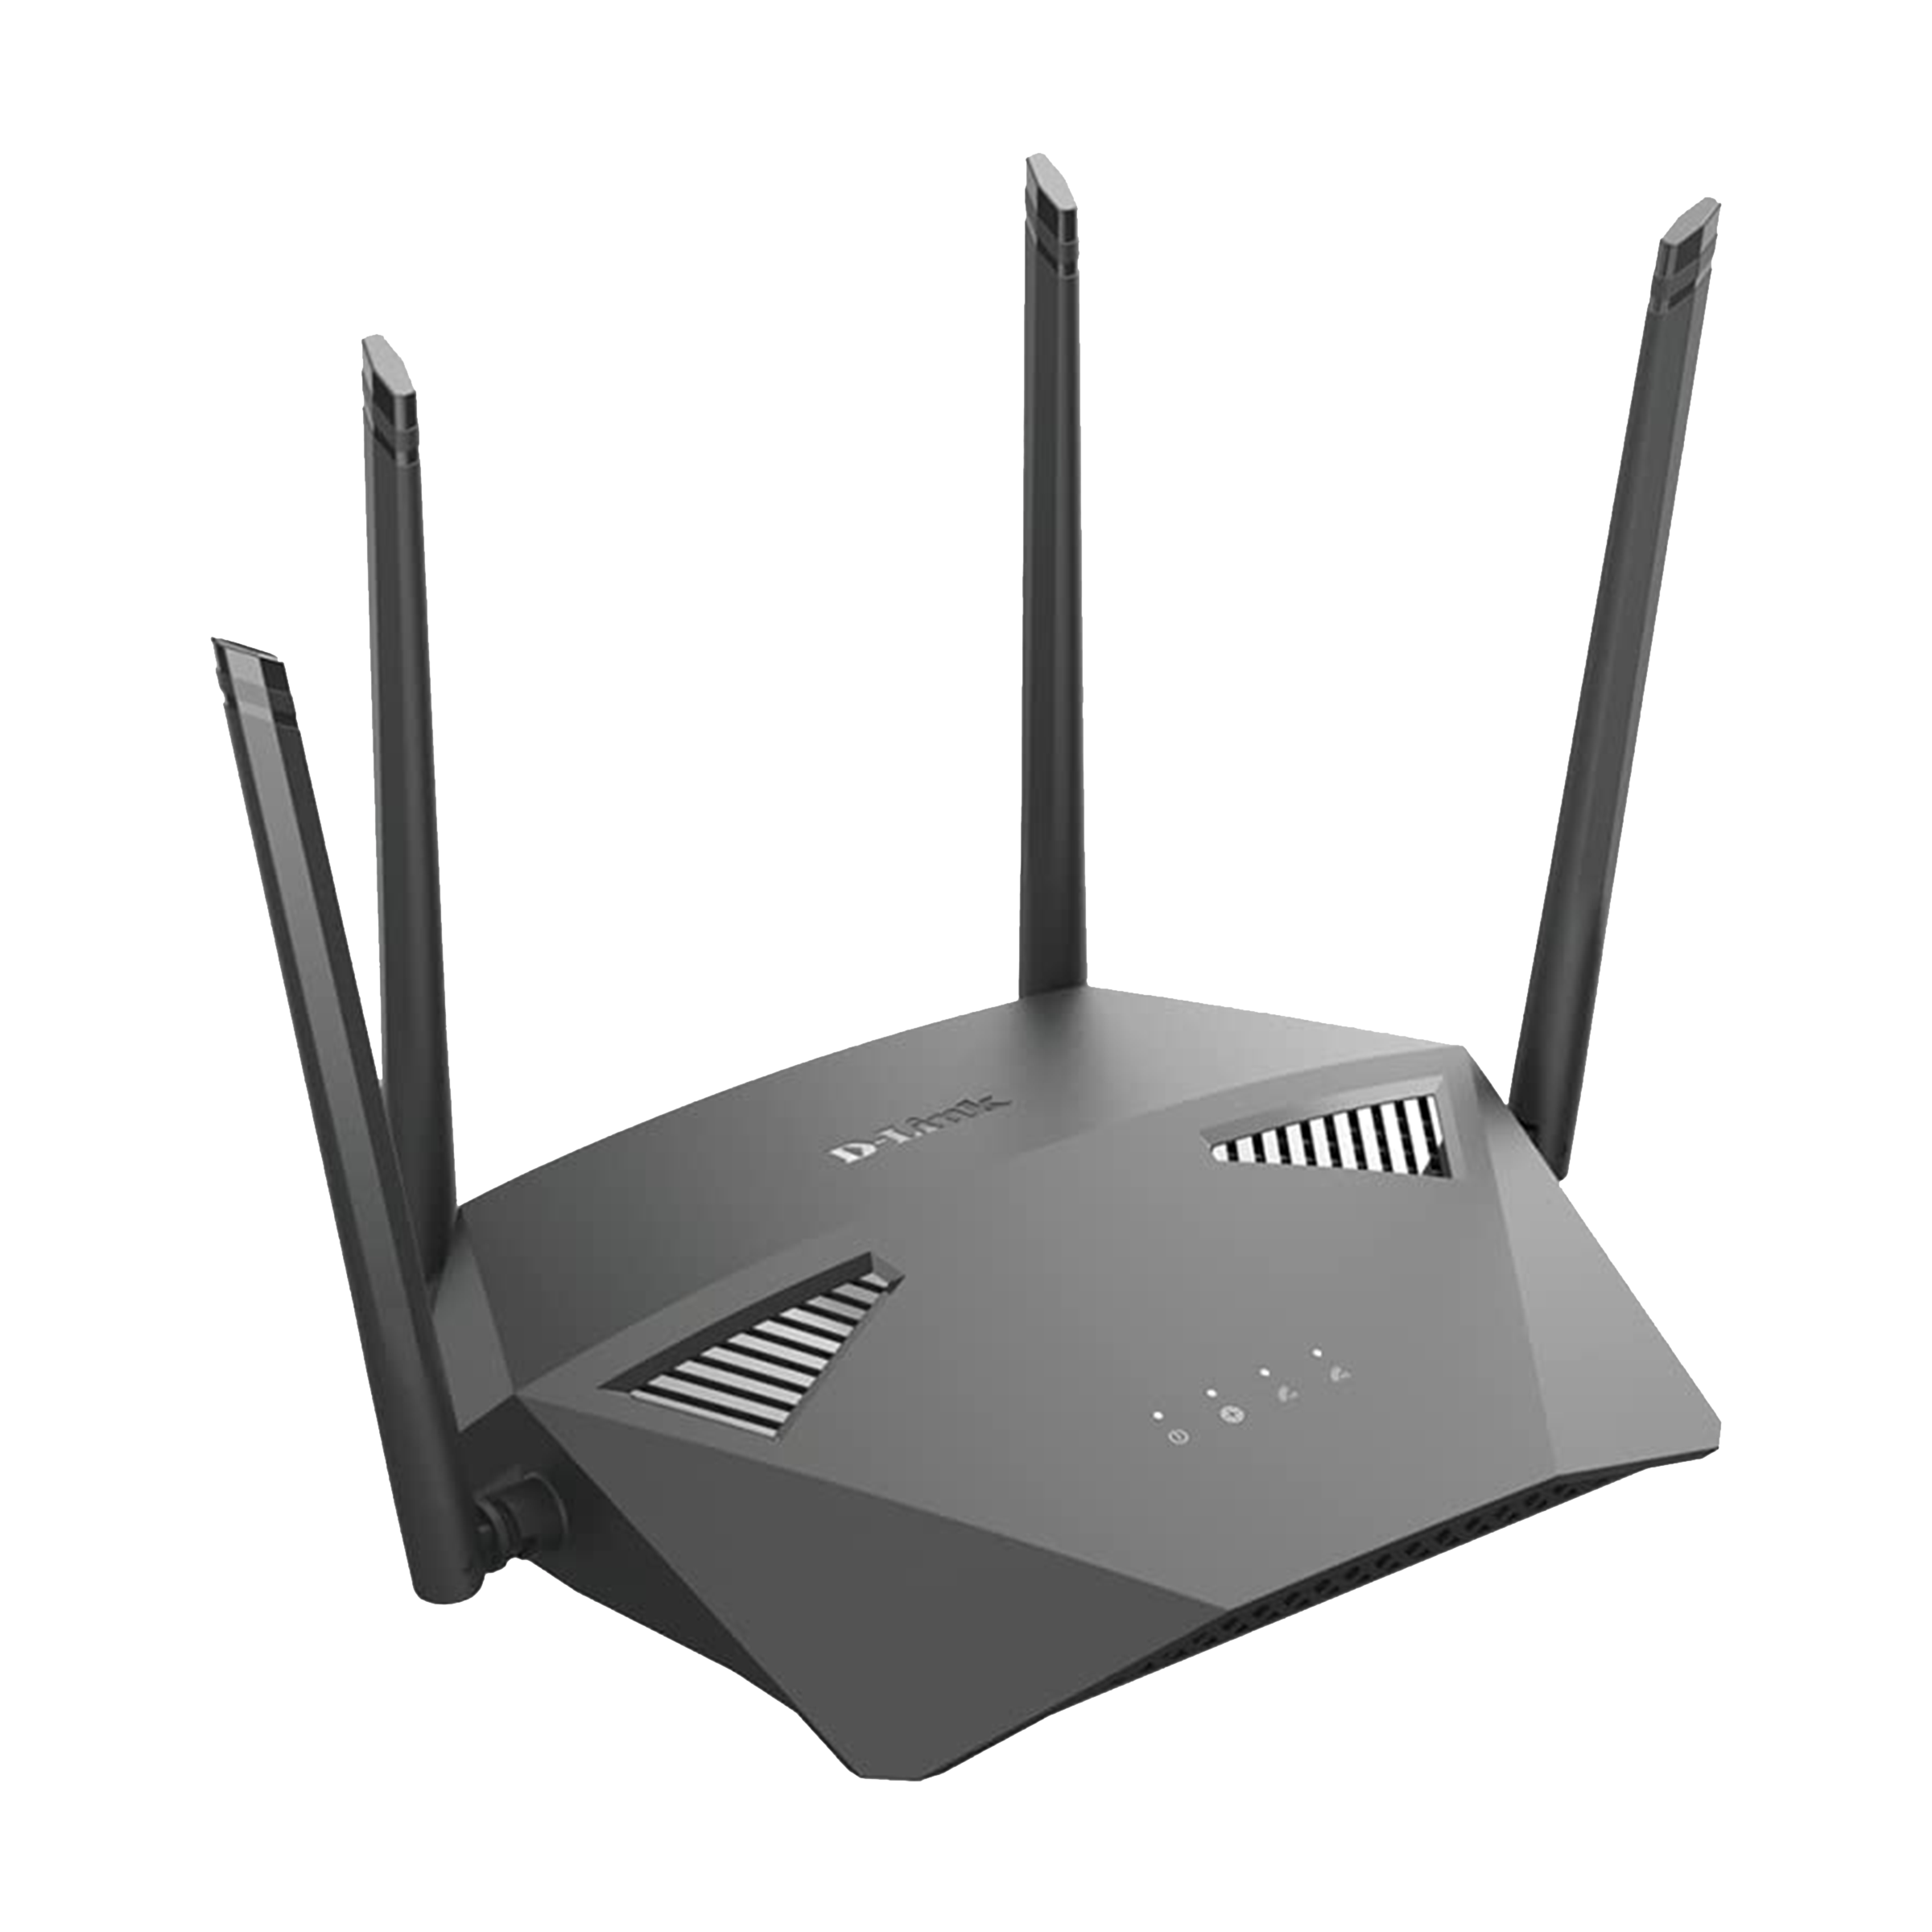 D-Link AC 1900 Dual Band 1300 Mbps WiFi EasyMesh Router (4 Antennas, 4 LAN Ports, MU-MIMO Supported, DIR-1950, Black)_3